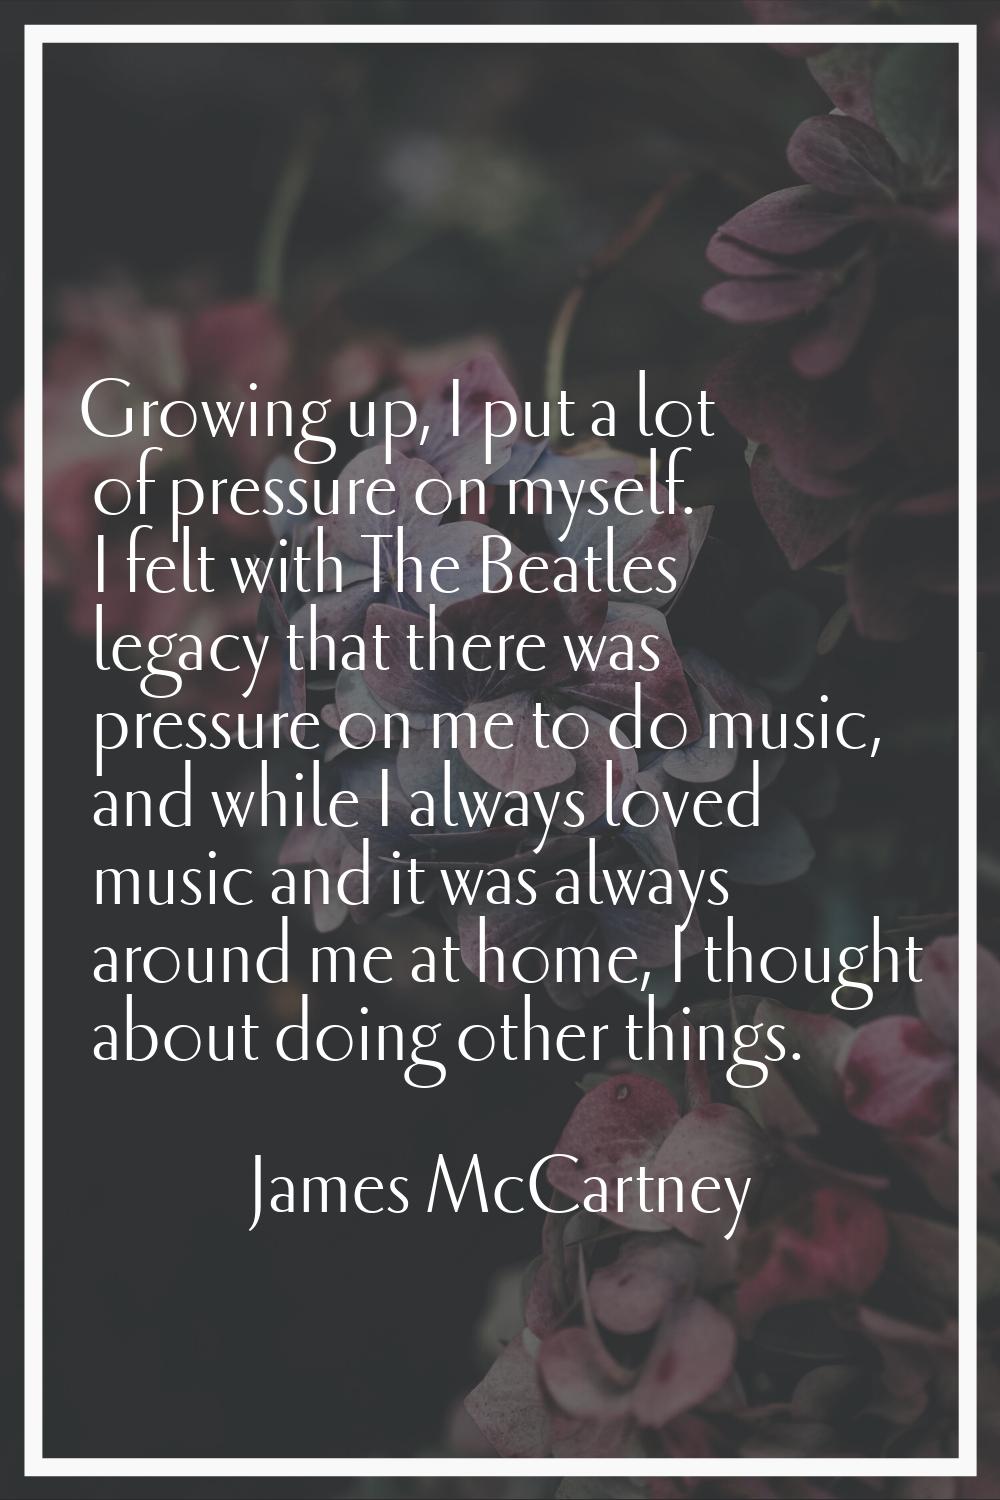 Growing up, I put a lot of pressure on myself. I felt with The Beatles legacy that there was pressu